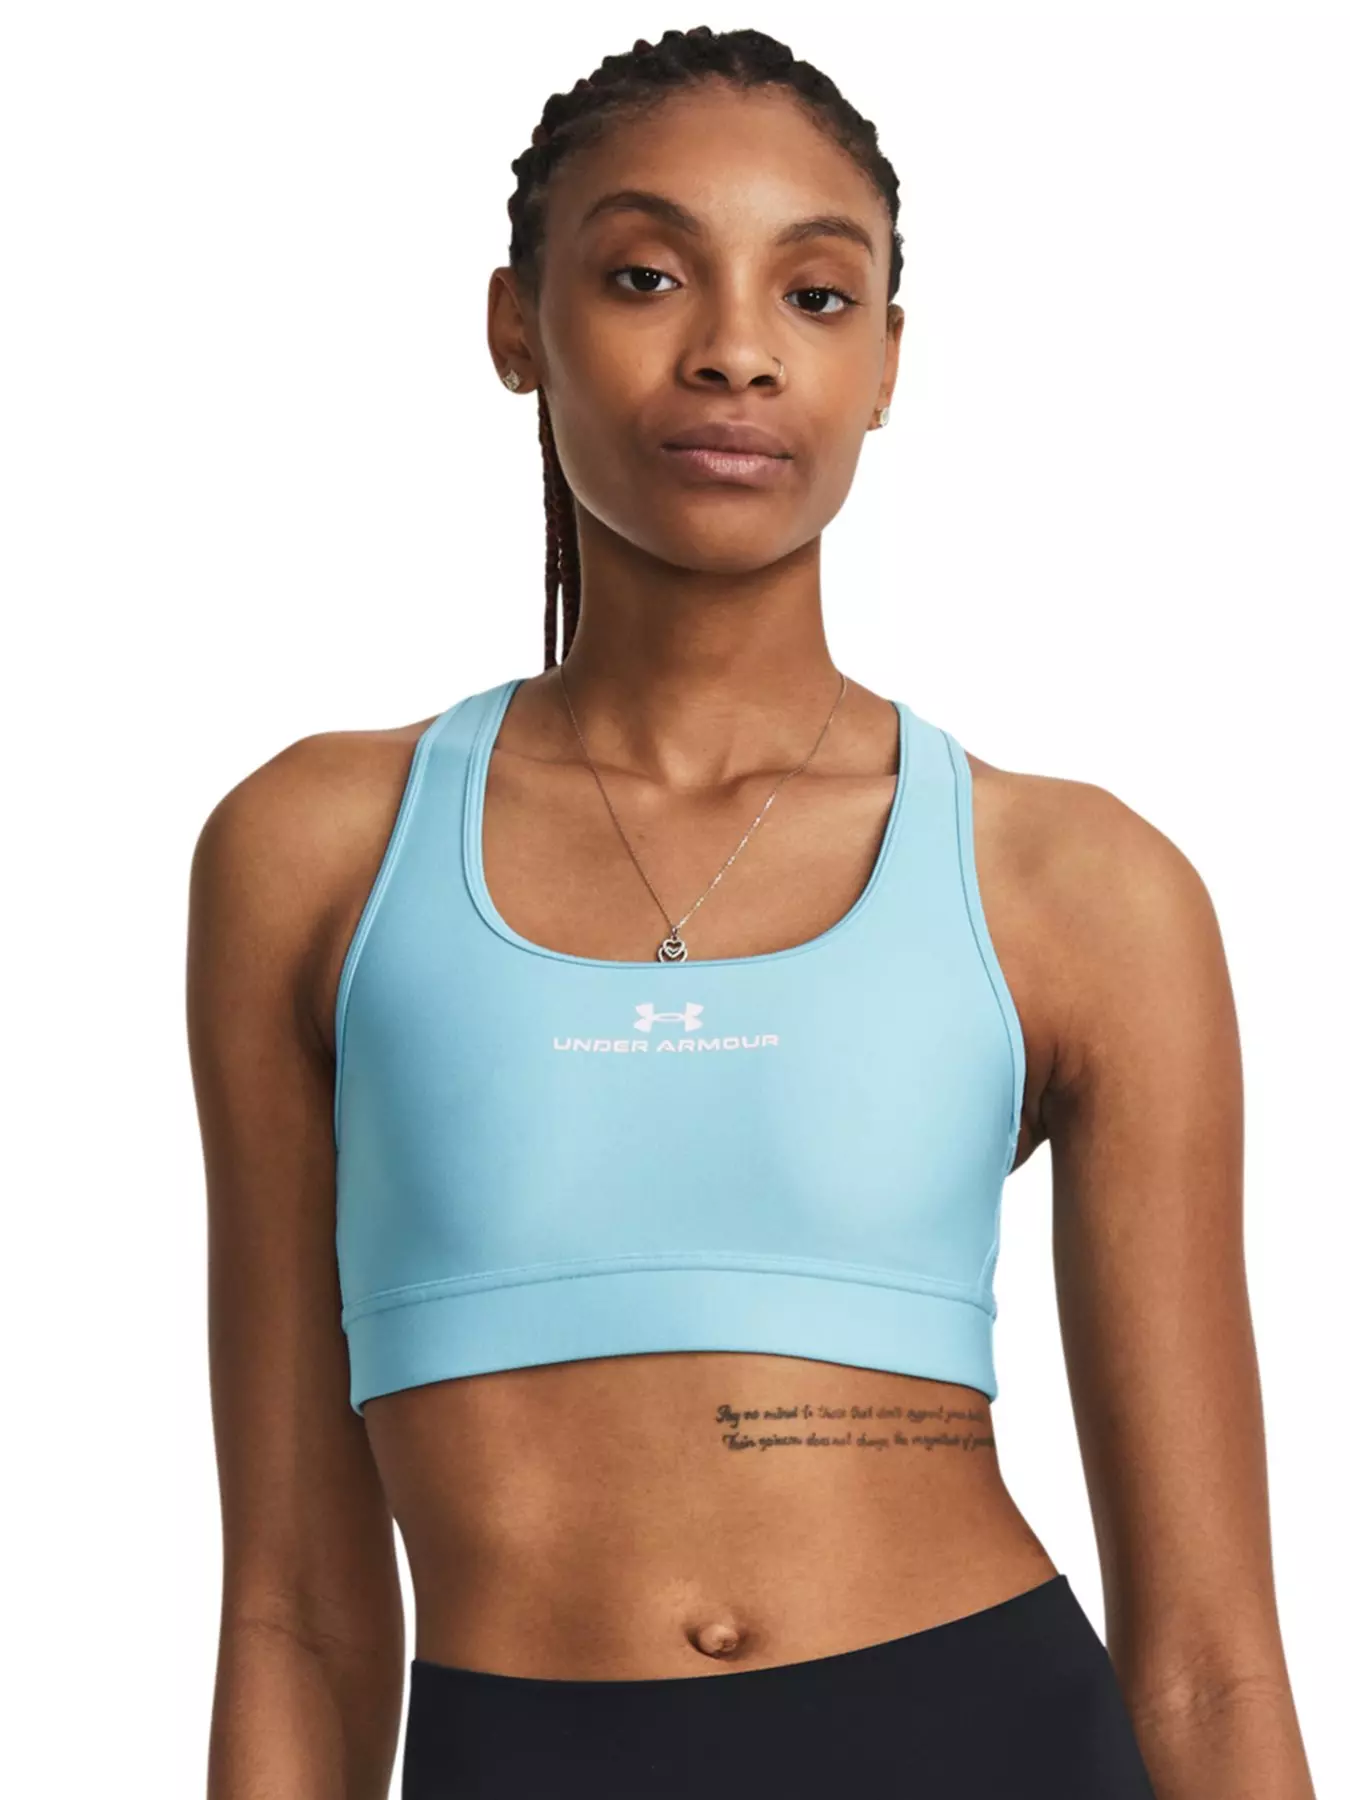  Under Armour Cross-Back Mid Bra Cruise Gold